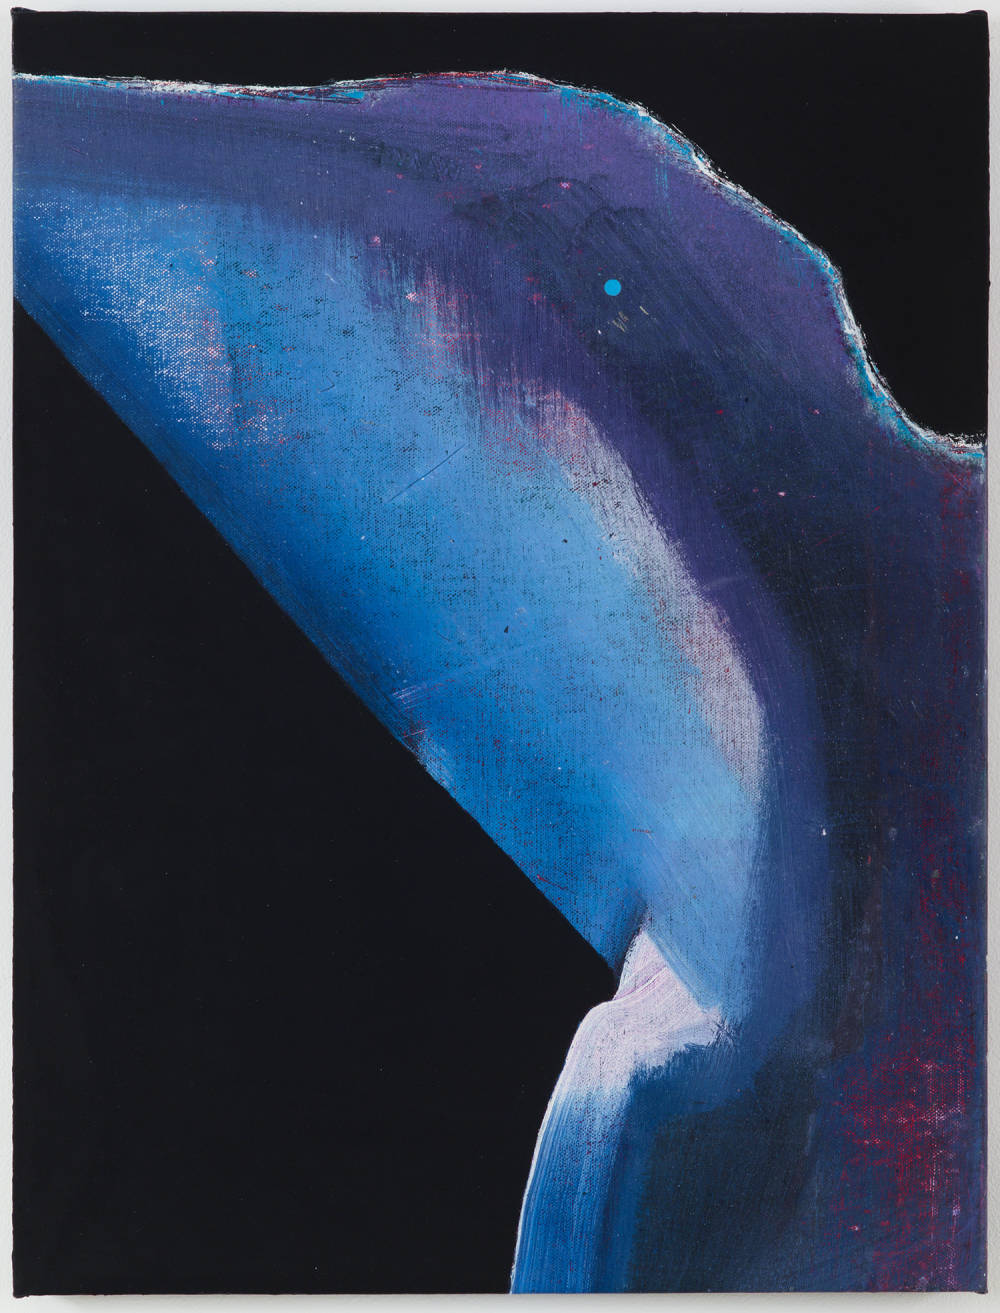 Oil on canvas painting depicting an abstract interpretation of a whale, only showing its head, against at black background.